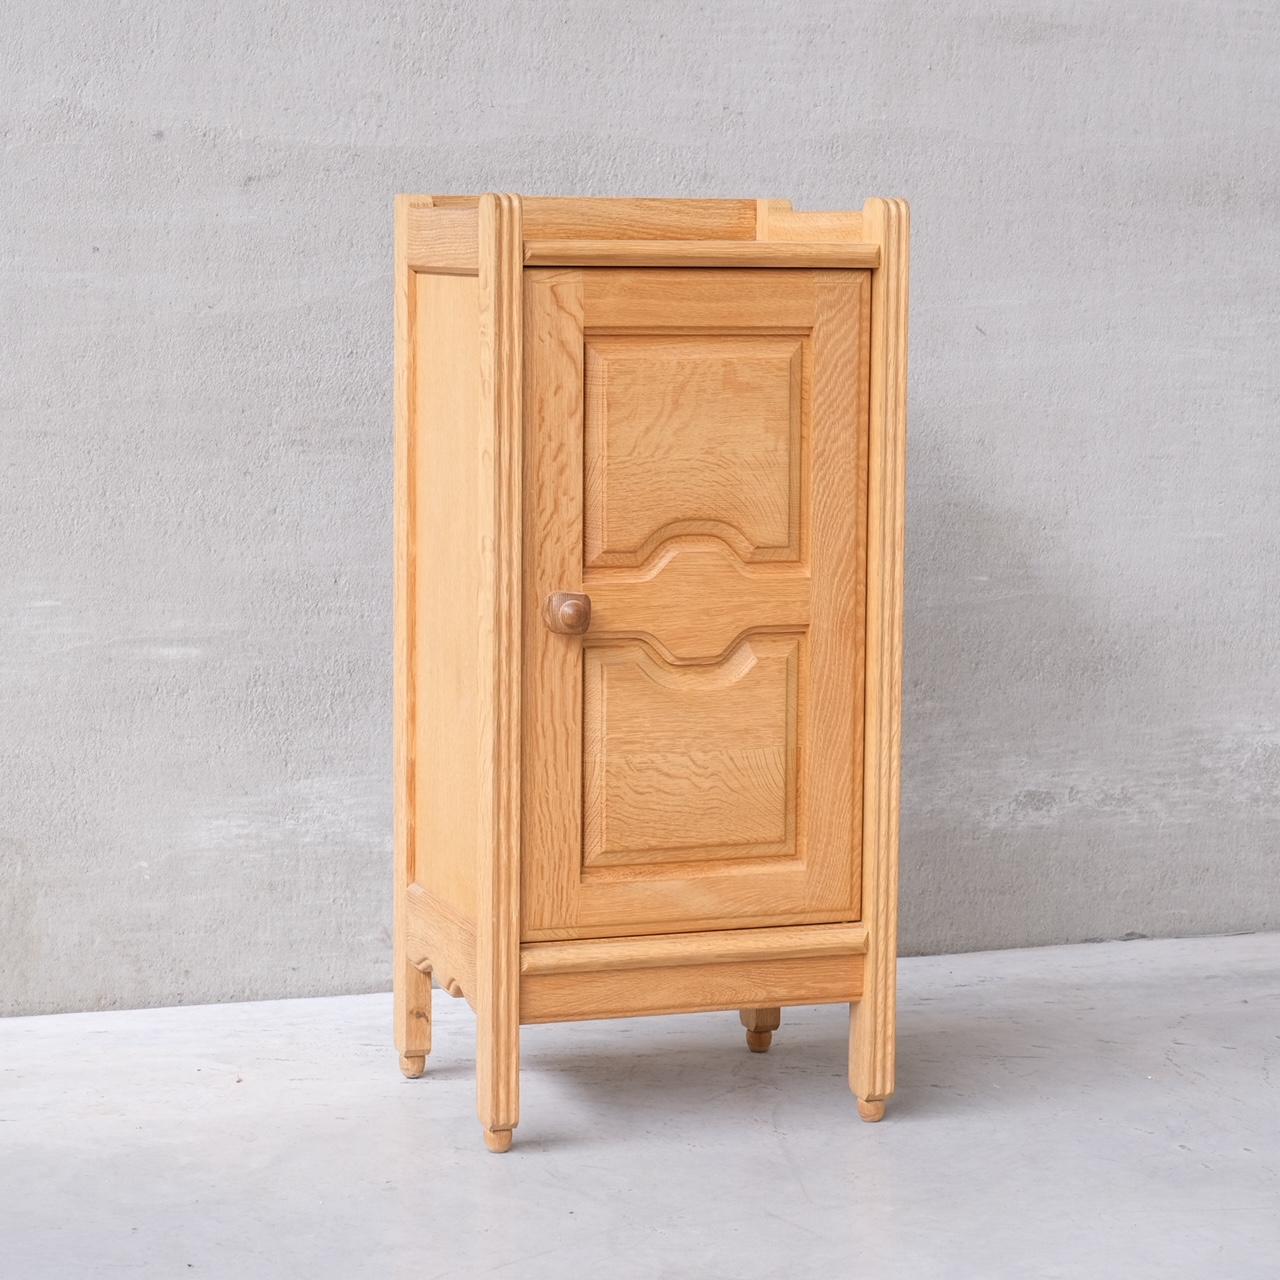 A thin cabinet by Guillerme et Chambron.

France, c1960s.

Two drawers internally, with one shelf.

Simple wooden turn lock handle.

Good vintage condition.

Location: Belgium Gallery.

Dimensions: 114 H x 52 W x 44 D in cm.

Delivery: